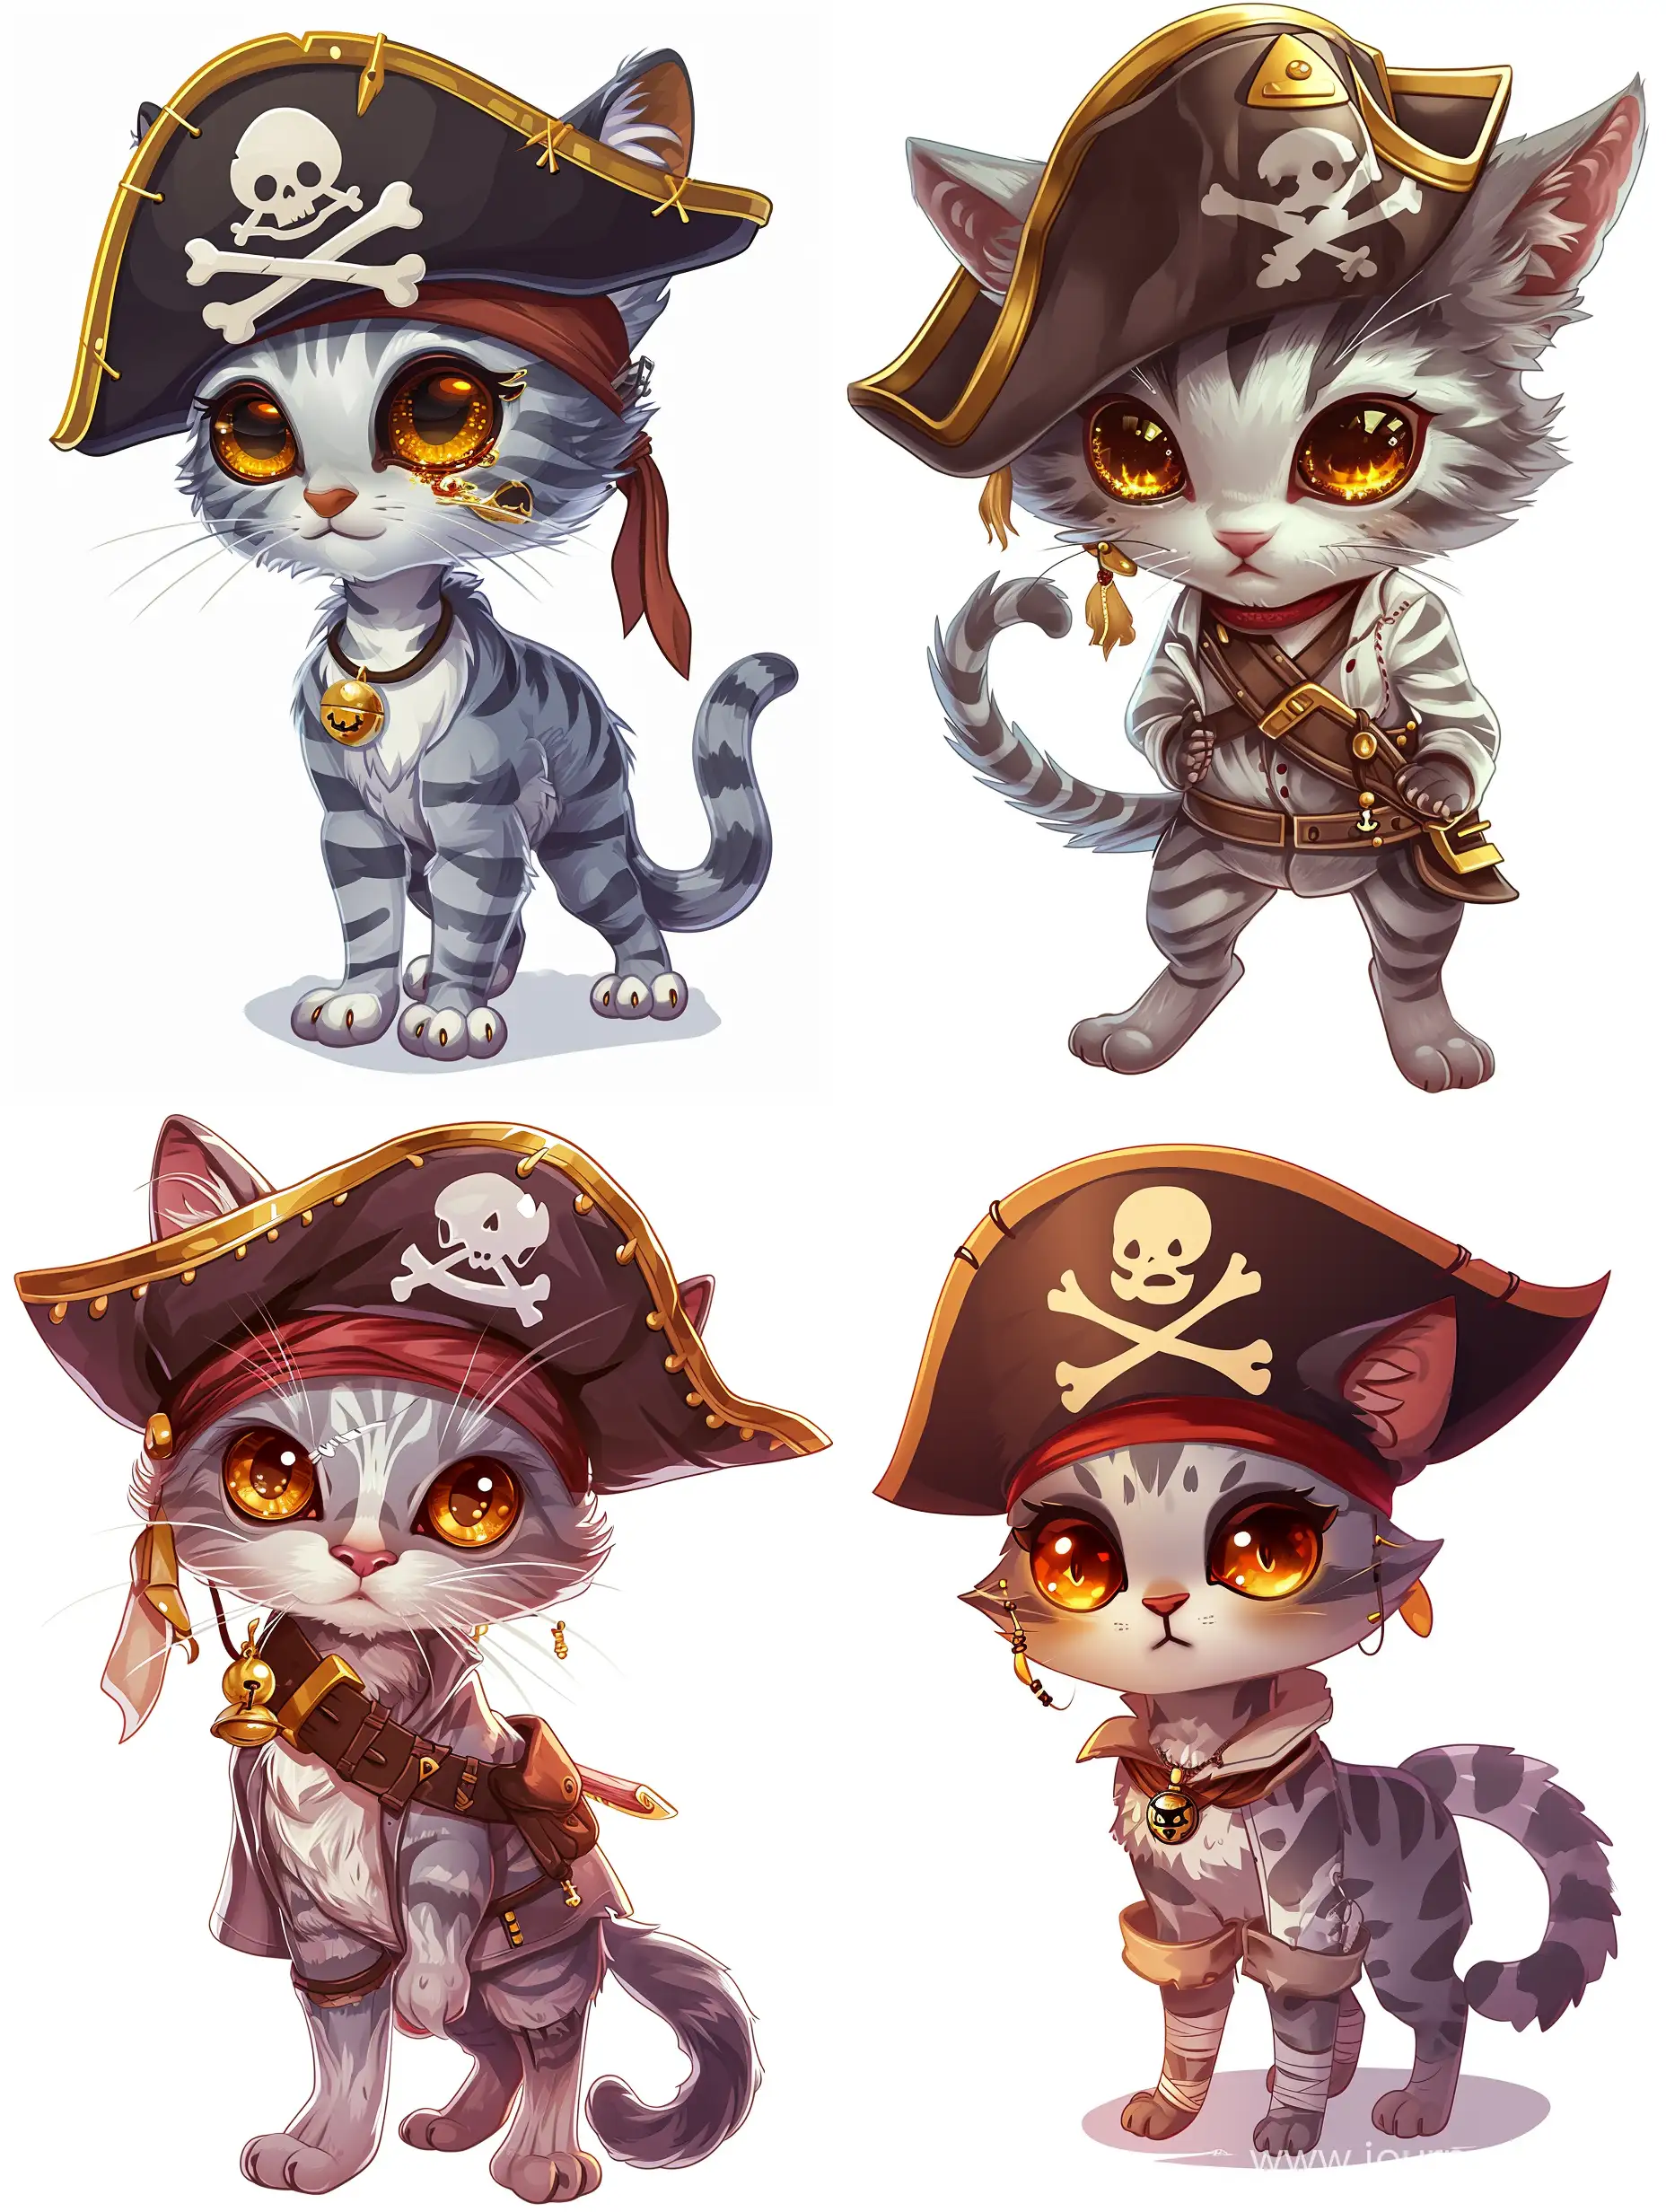 Cute little female cat pirate sailor, with amber eyes that shimmer beautifully, the color of the cat is gray with white stripes, she is wearing a pirate hat, her ear is pierced with a gold earring, her left eye is covered with a pirate bandage, she stands in a pirate pose, hd, png, white background, cartoon, 2D, minimalism